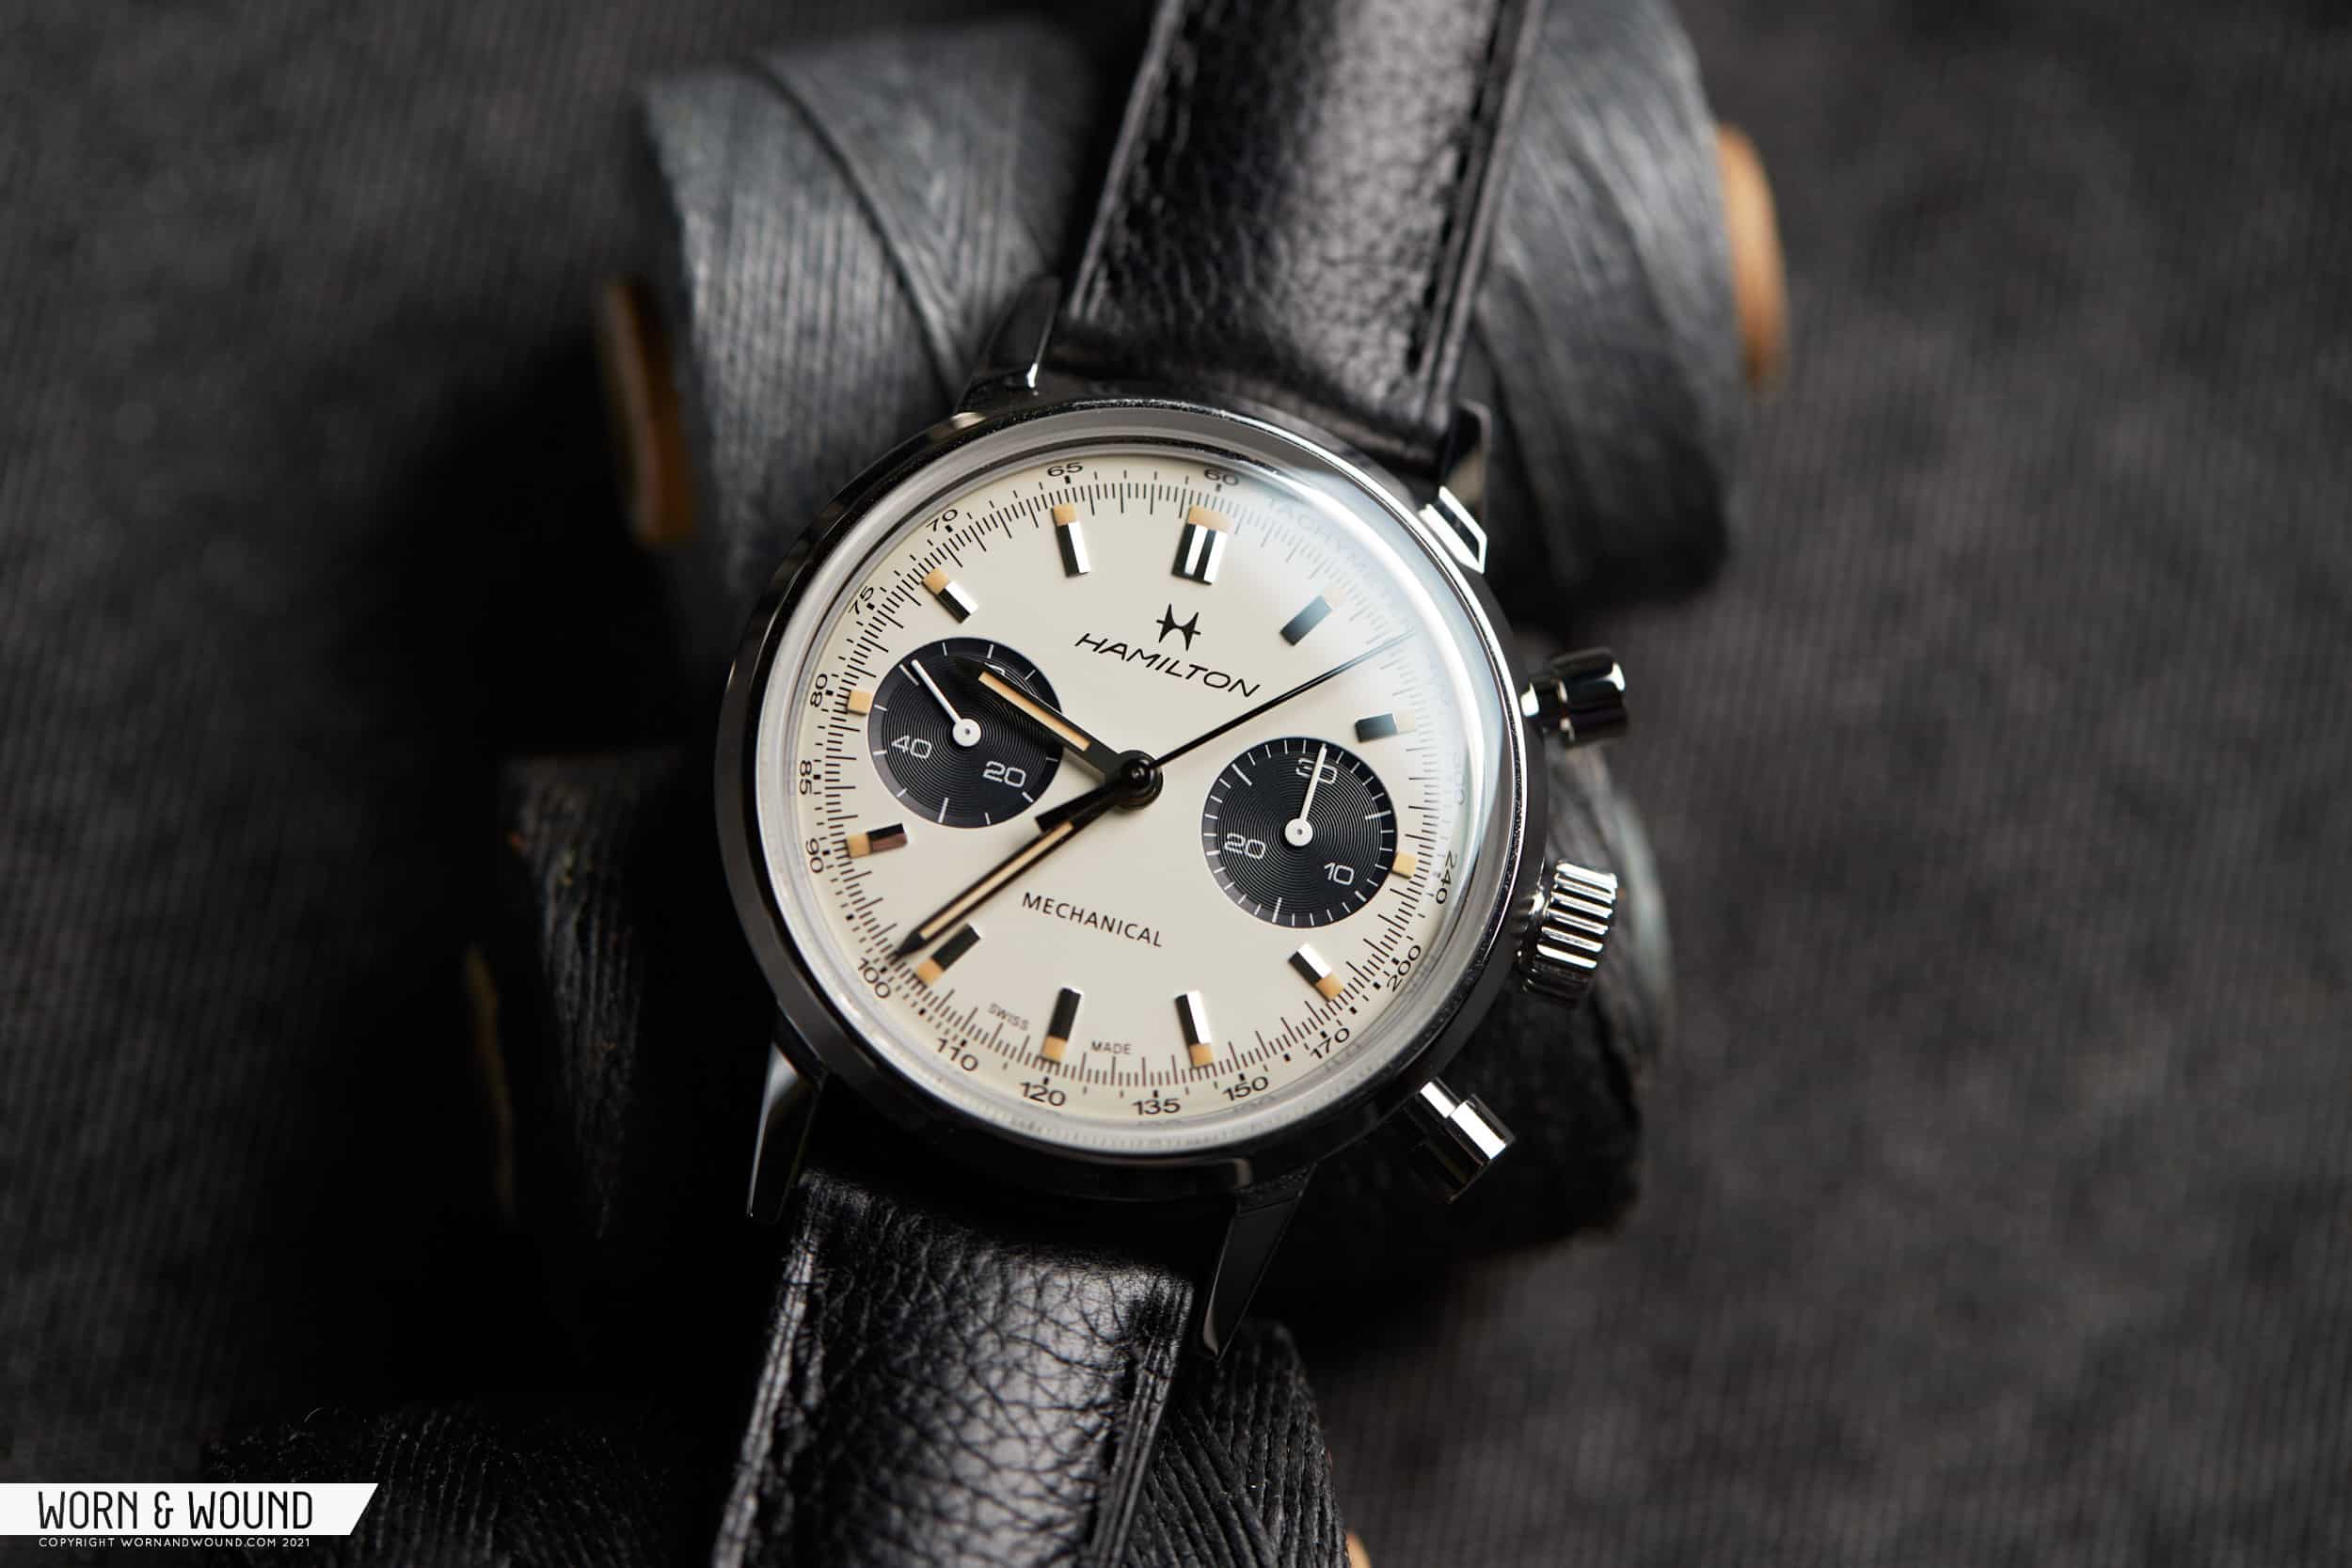 Hands-On With The Hand-Wound Hamilton Chronograph H